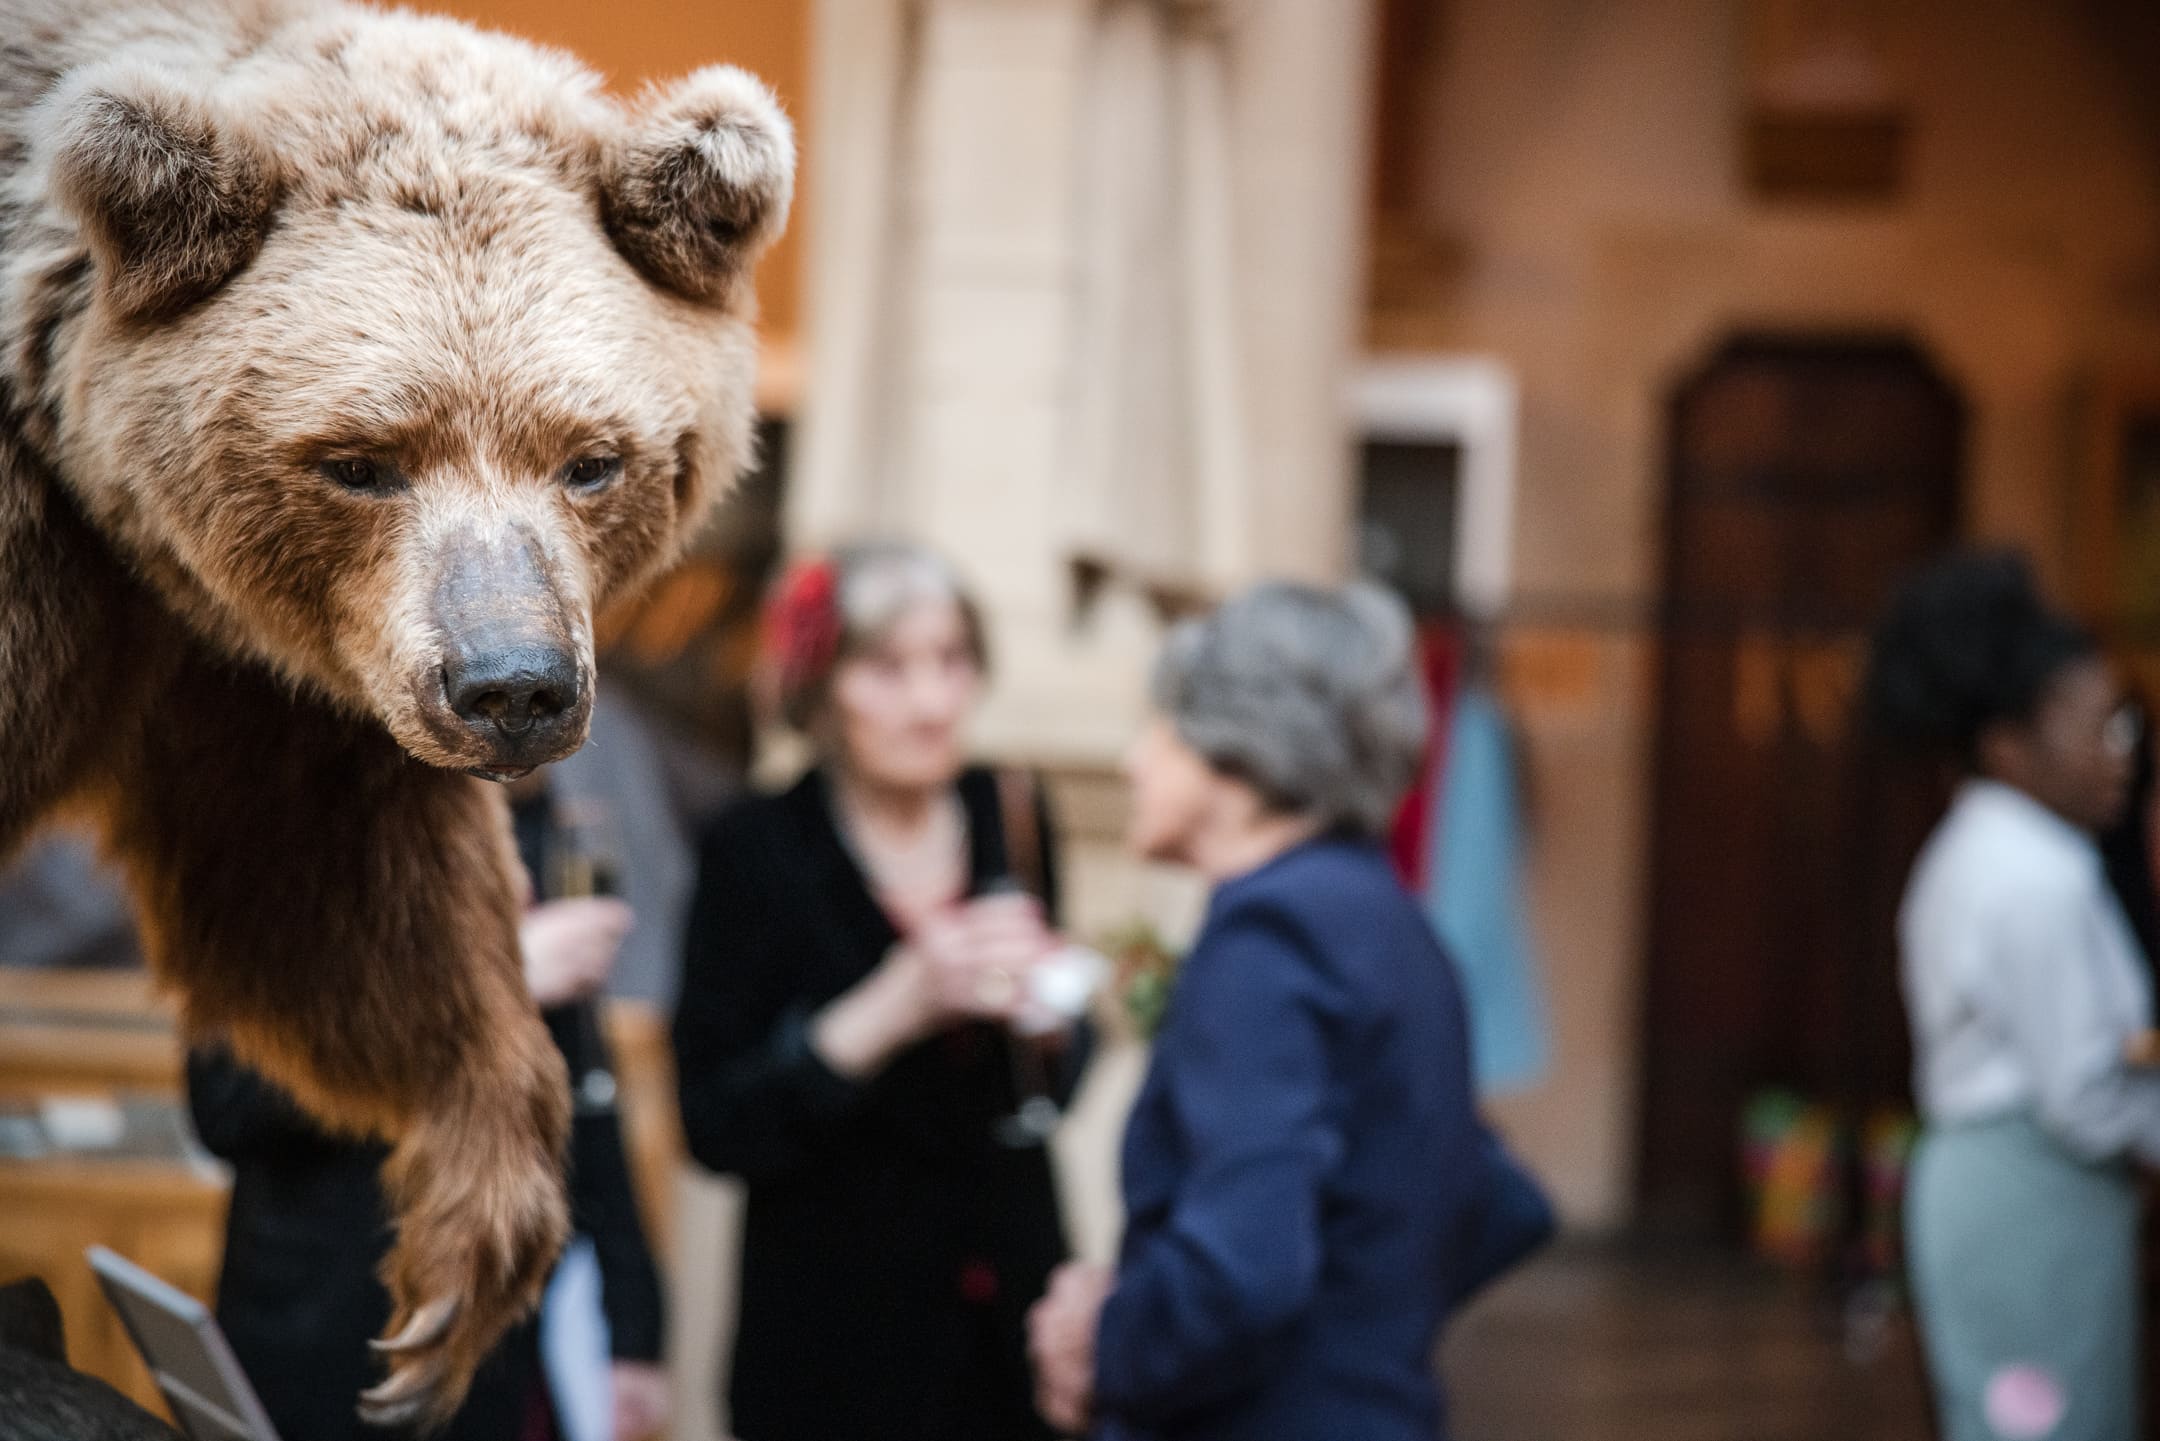 Photo of a Bears head with two Wedding Guests talking in the background at the Oxford Natural History Museum